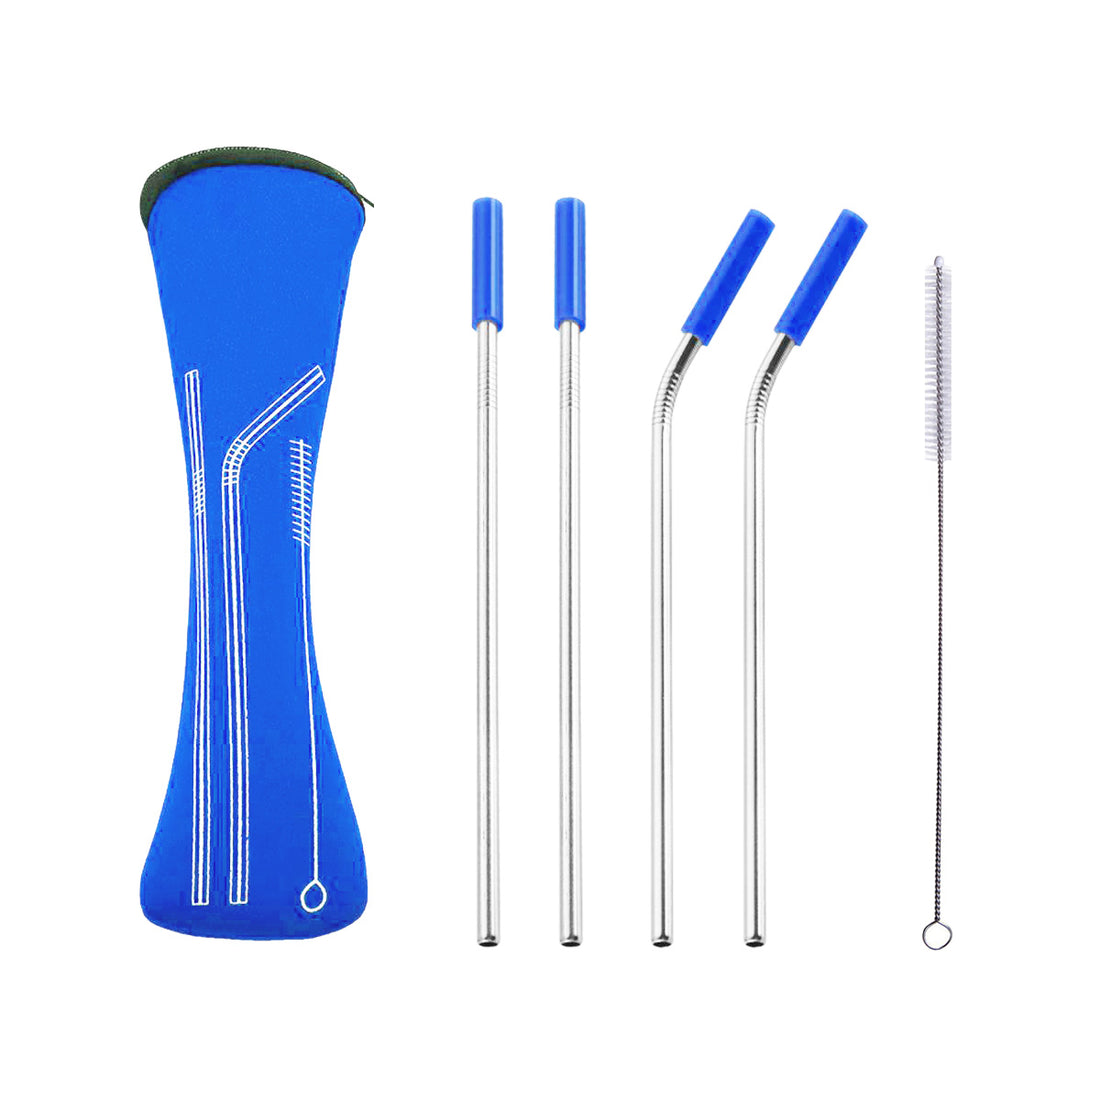 Reusable Stainless Steel Straw Set with Carrying Case and Cleaning Brush